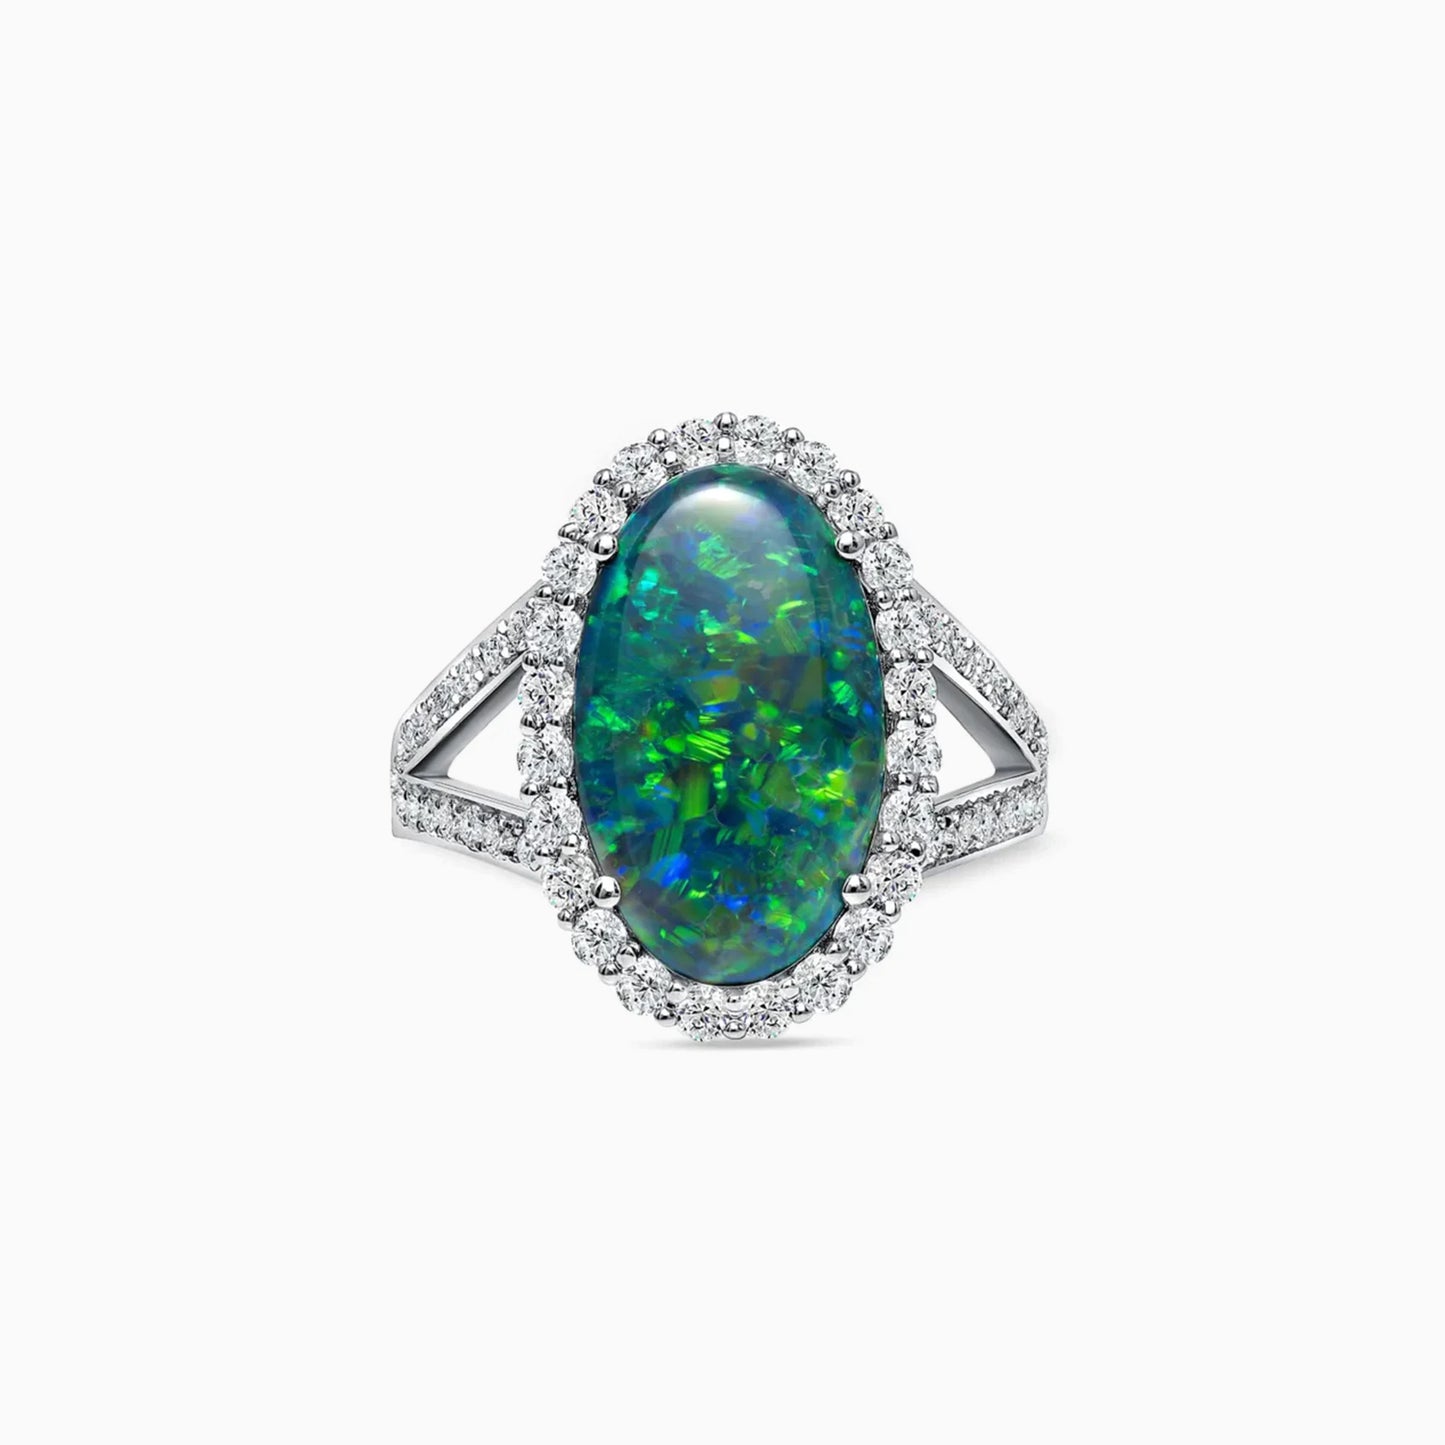 Black Opal and Diamonds Enigma Ring on a white background